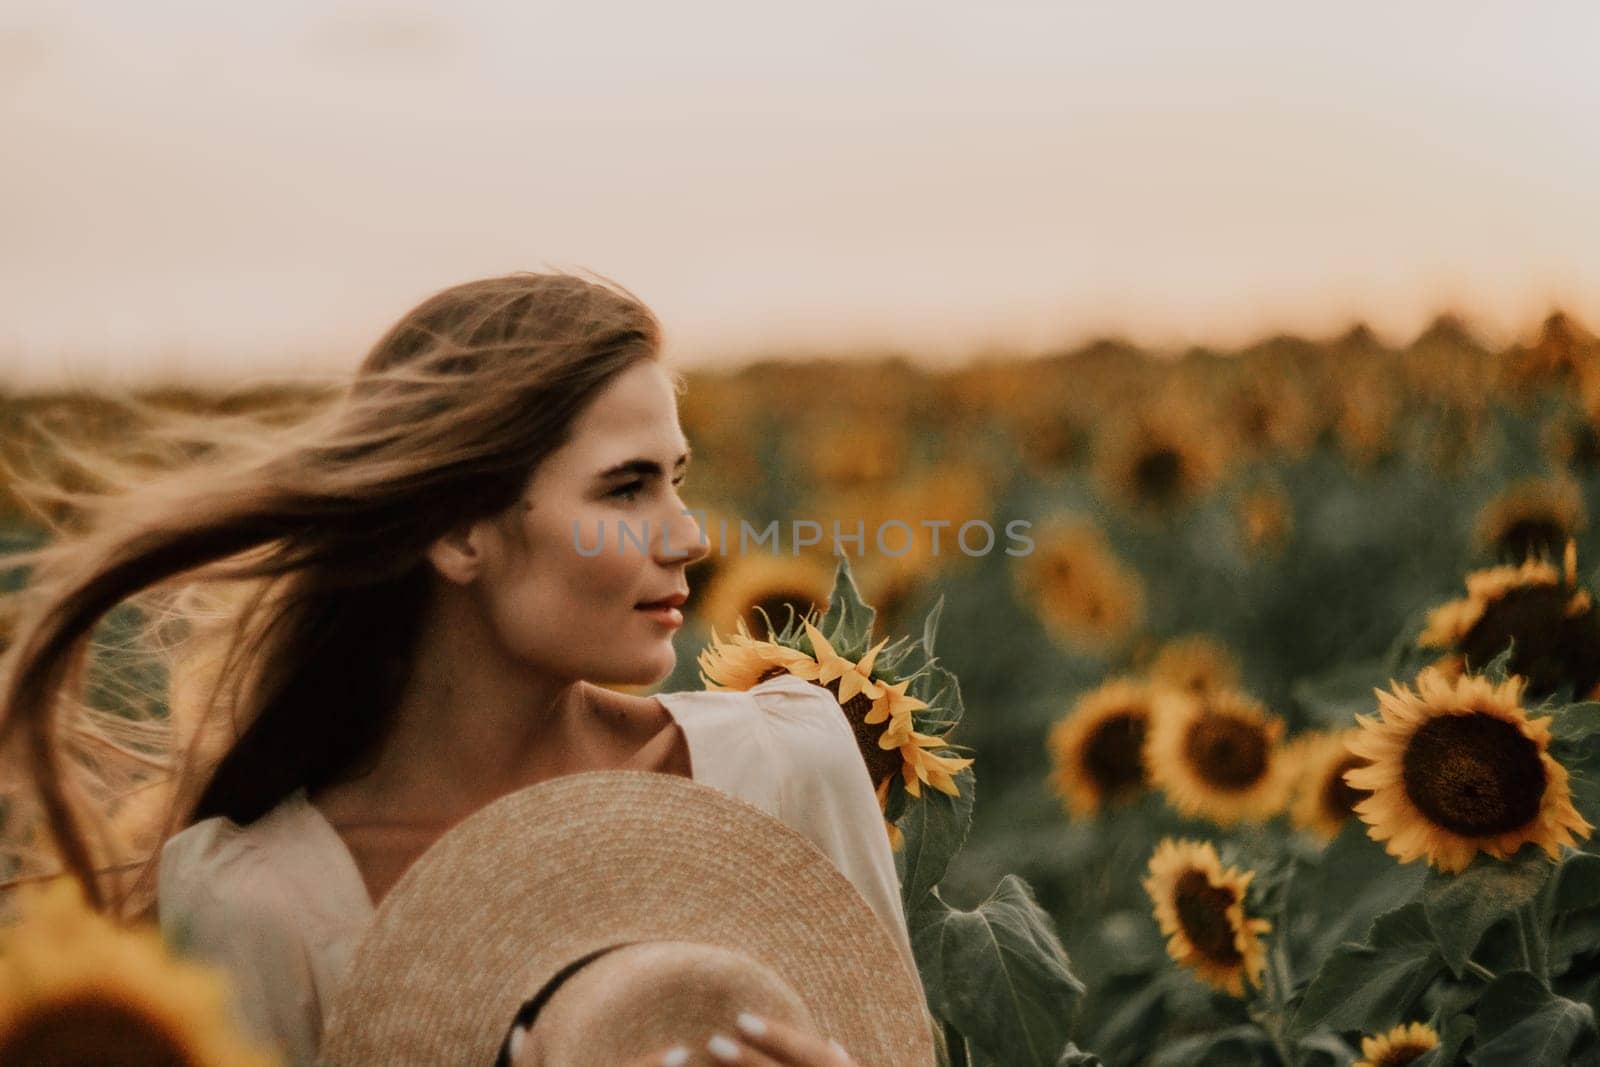 Woman in Sunflower Field: Happy girl in a straw hat posing in a vast field of sunflowers at sunset, enjoy taking picture outdoors for memories. Summer time. by panophotograph